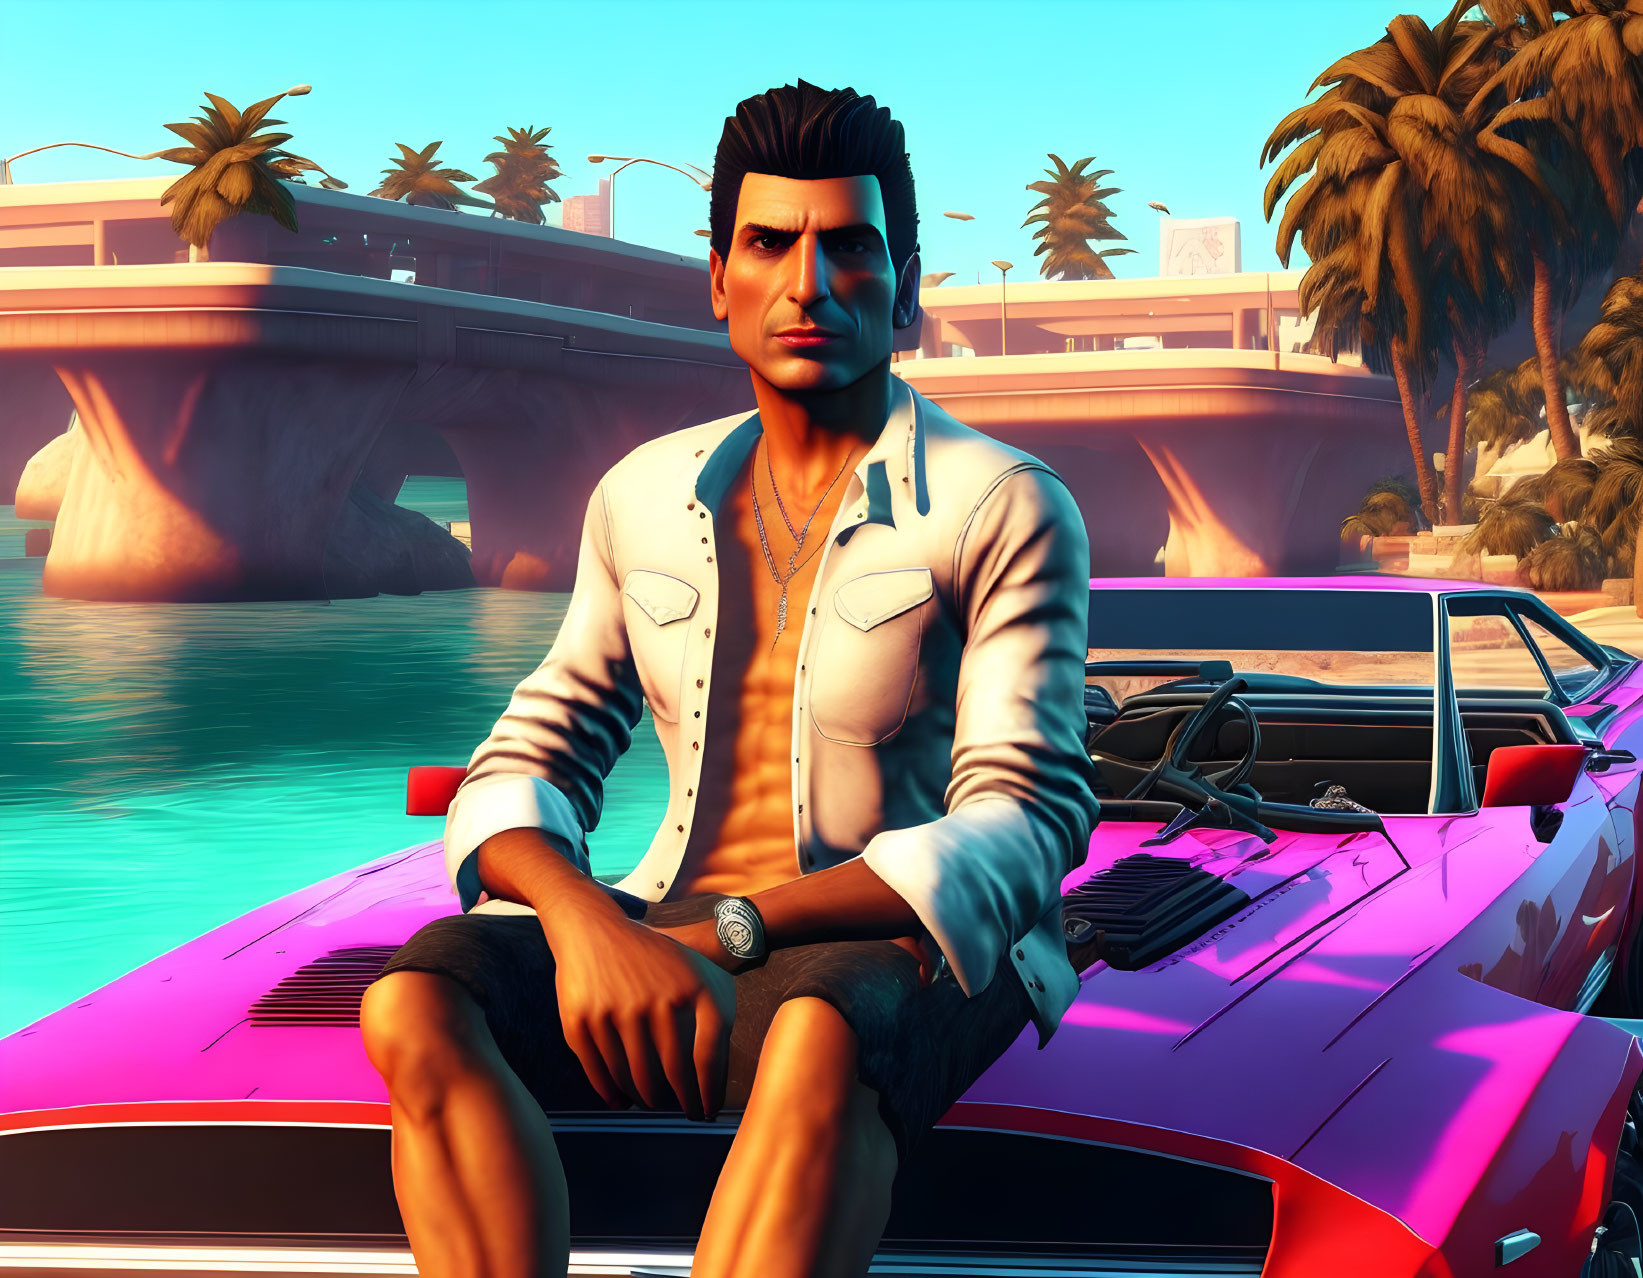 Male character with slicked-back hair in white jacket on pink convertible by sunny waterfront.